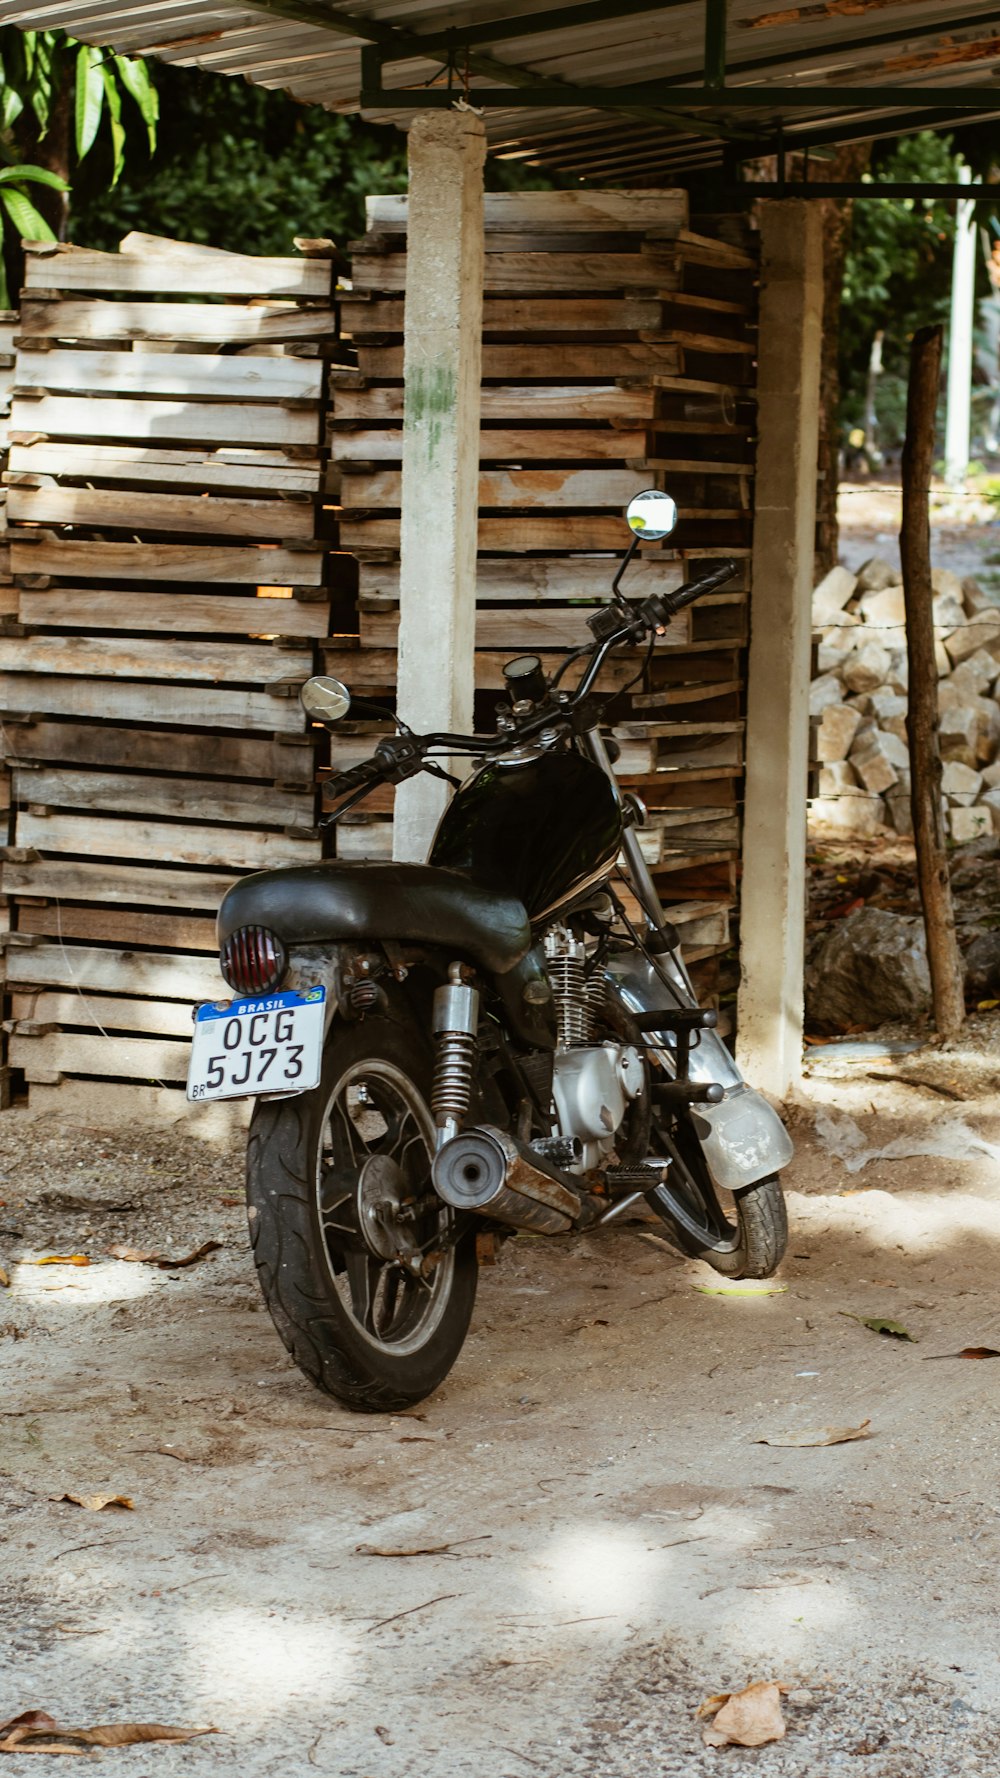 a black motorcycle parked under a wooden structure